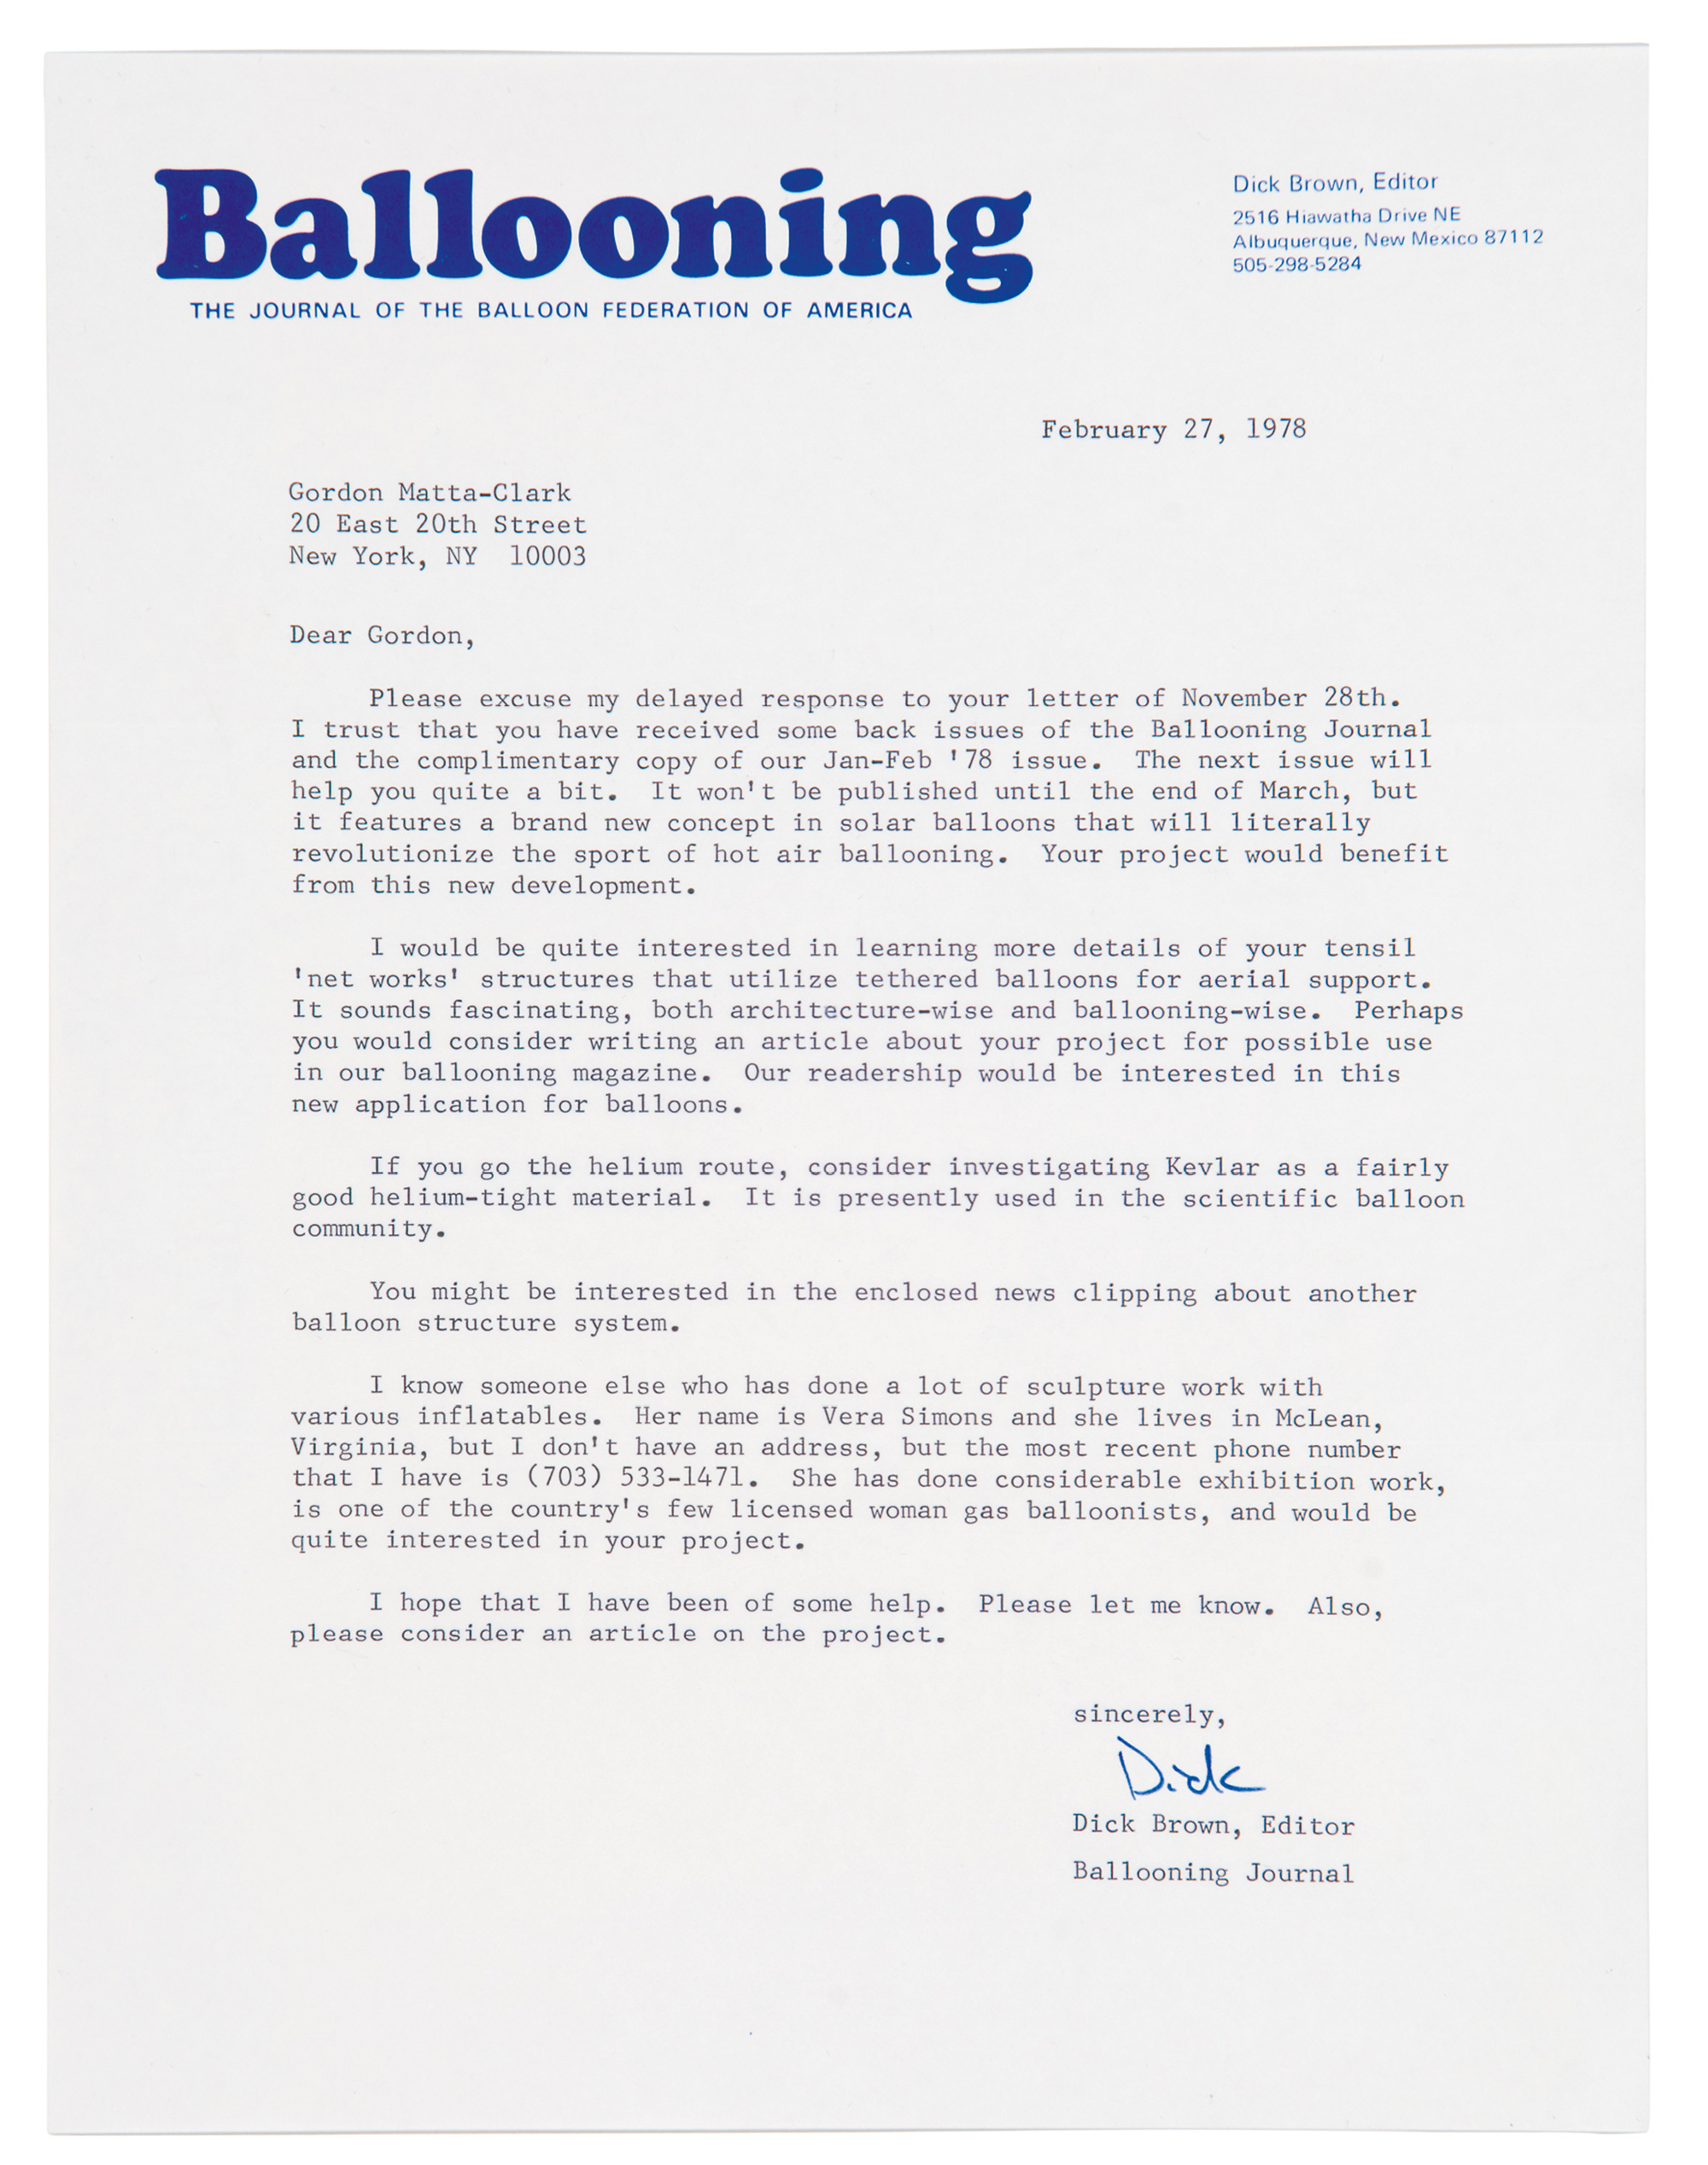 A 1977 letter from Dick Brown at Ballooning, The Journal of the Balloon Federation of America, to Gordon Matta-Clark. 